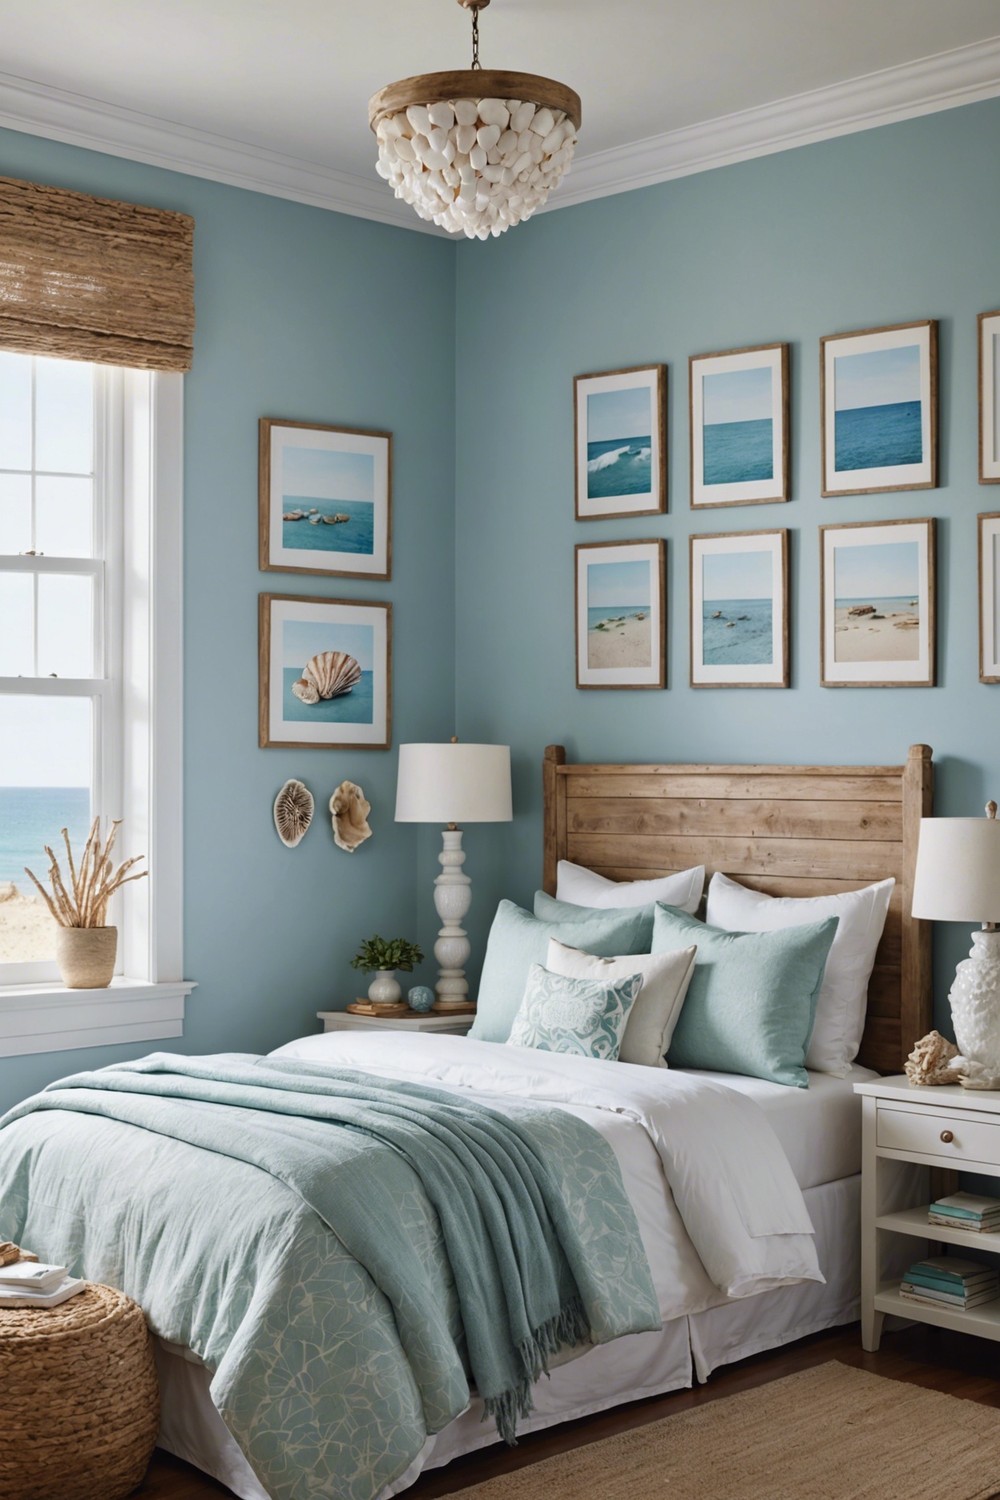 Coastal Artwork to Bring the Outdoors In